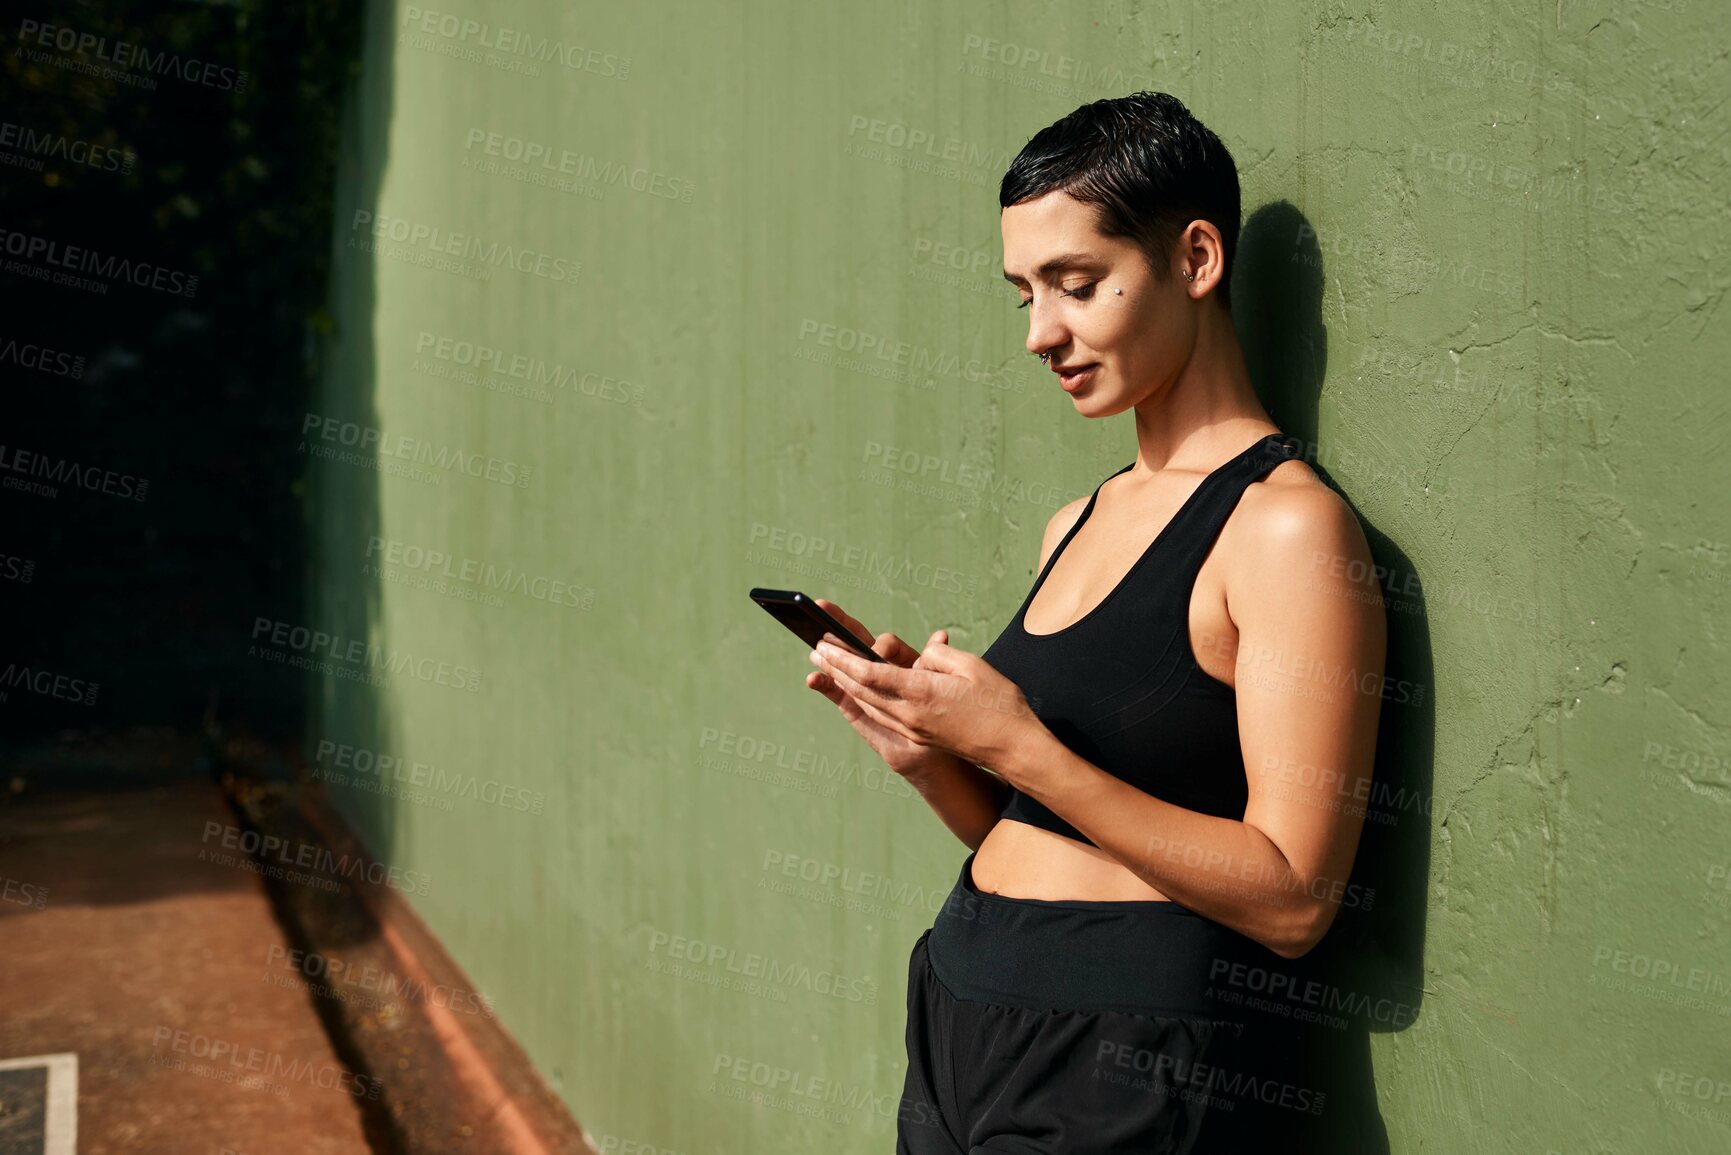 Buy stock photo Cropped shot of an attractive young sportswoman standing alone and using her cellphone after a basketball game